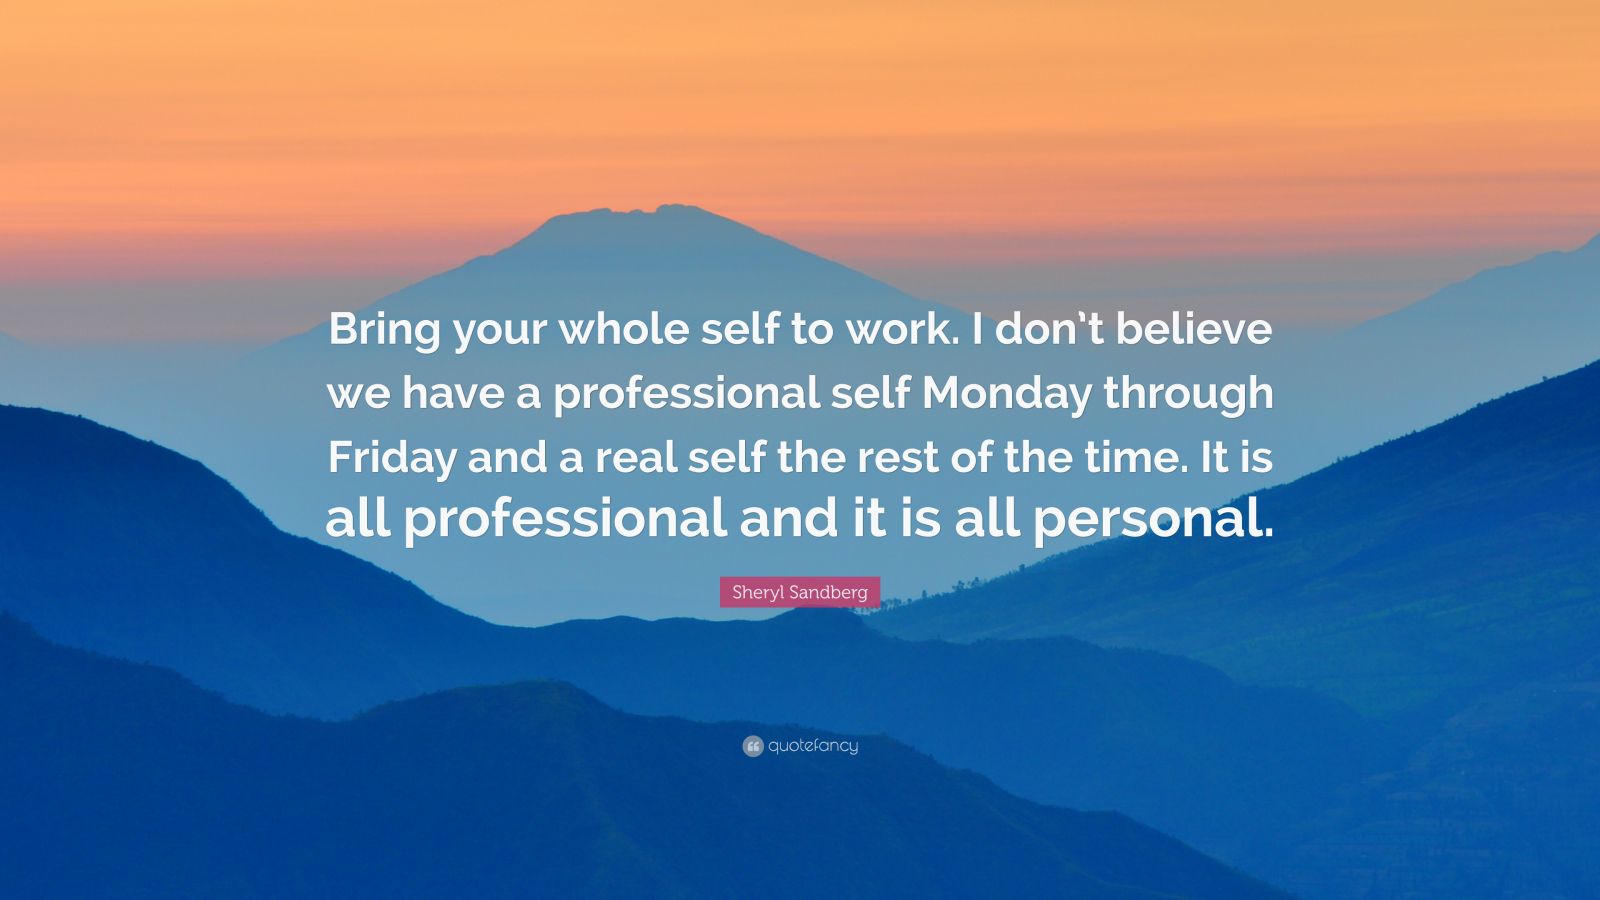 Sheryl Sandberg Quote: “Bring your whole self to work. I don’t believe